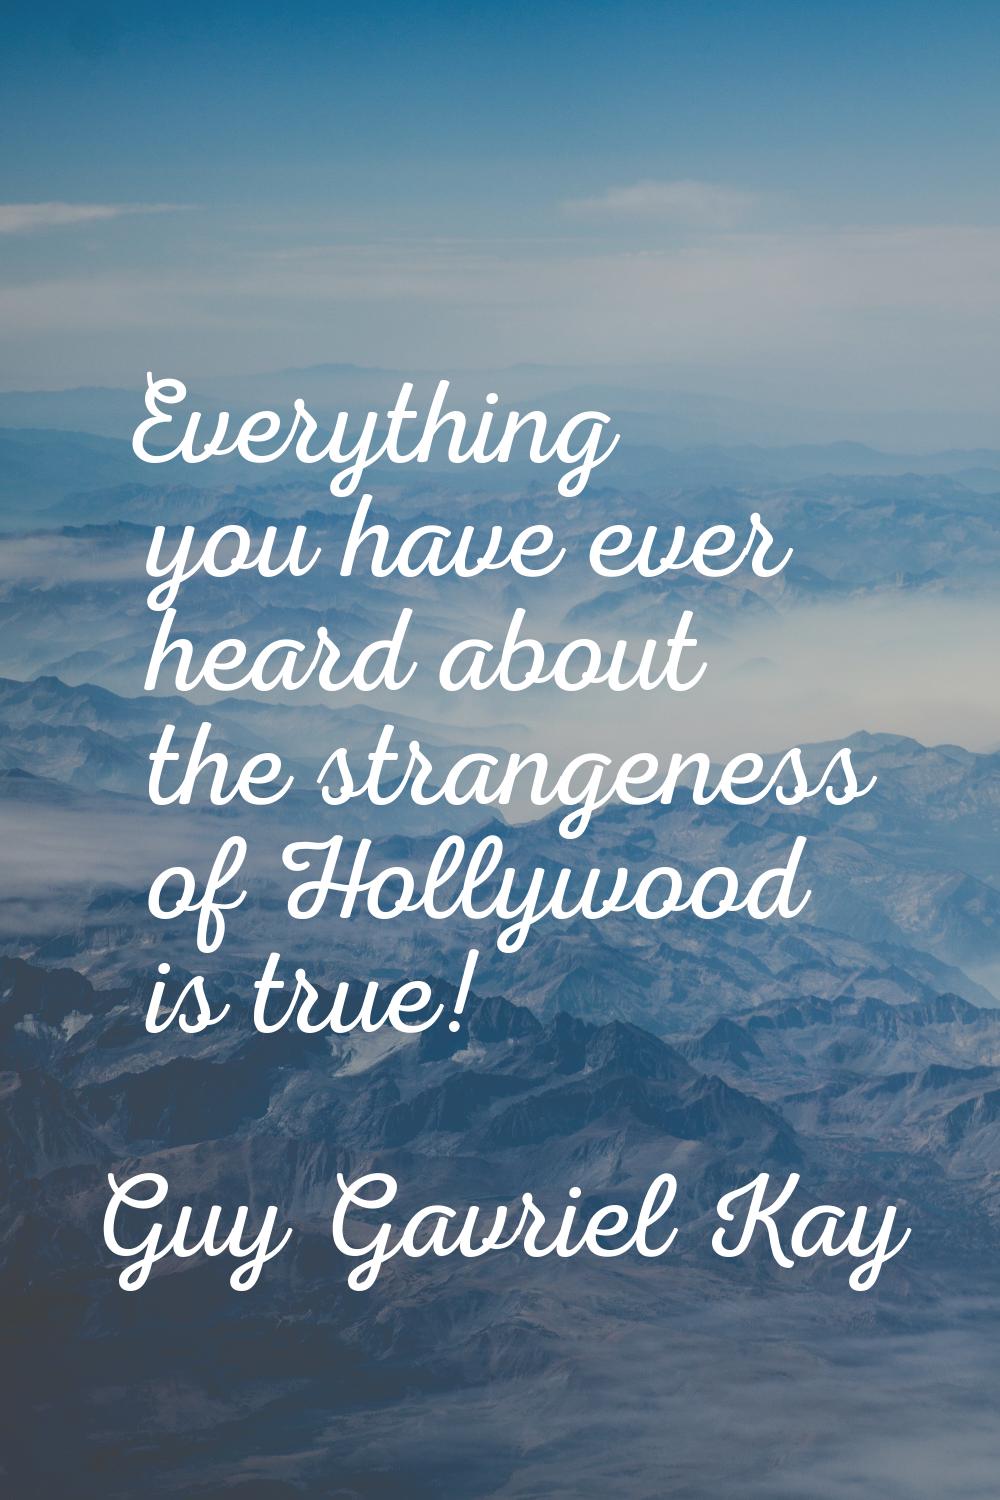 Everything you have ever heard about the strangeness of Hollywood is true!